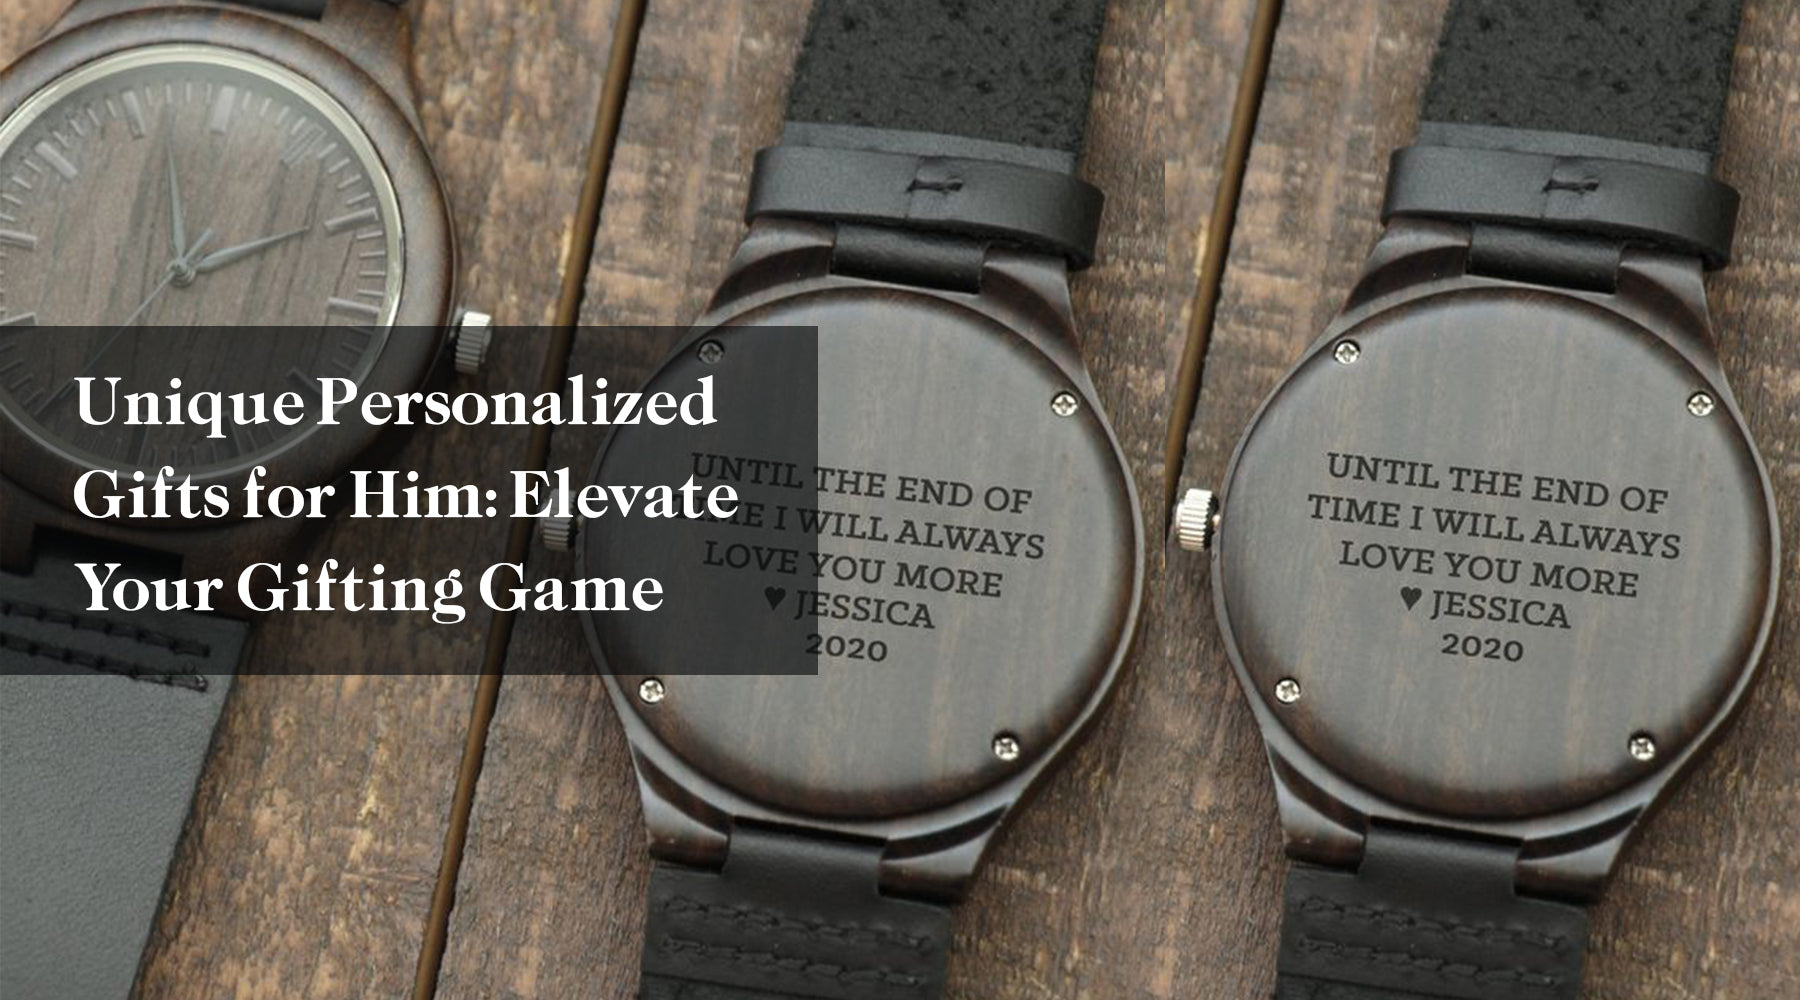 Unique Personalized Gifts for Him: Elevate Your Gifting Game